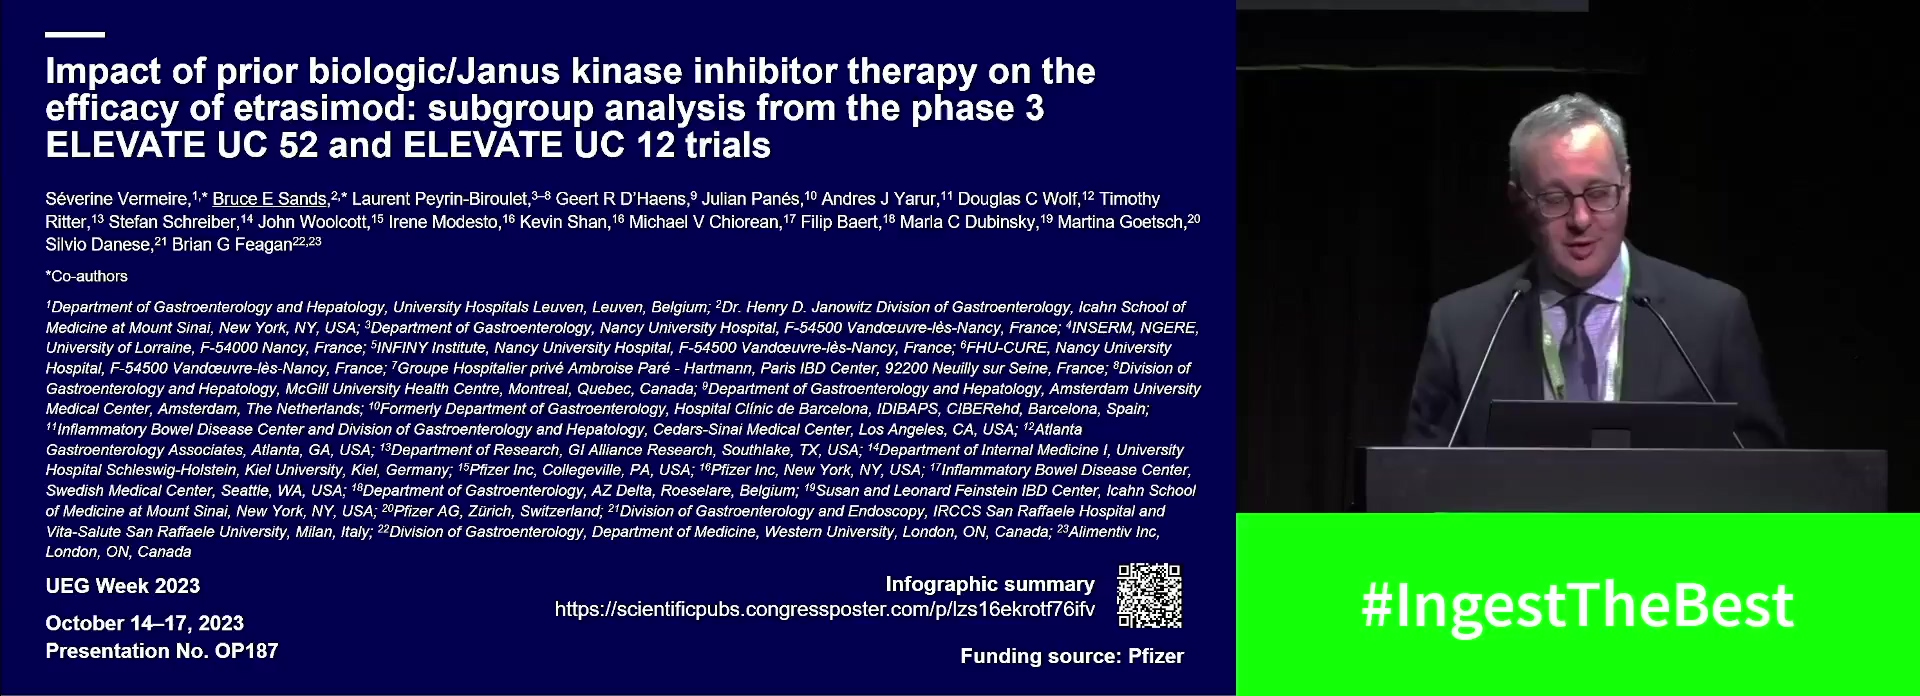 IMPACT OF PRIOR BIOLOGIC/JANUS KINASE INHIBITOR THERAPY ON THE EFFICACY OF ETRASIMOD: SUBGROUP ANALYSIS FROM THE PHASE 3 ELEVATE UC 52 AND ELEVATE UC 12 TRIALS